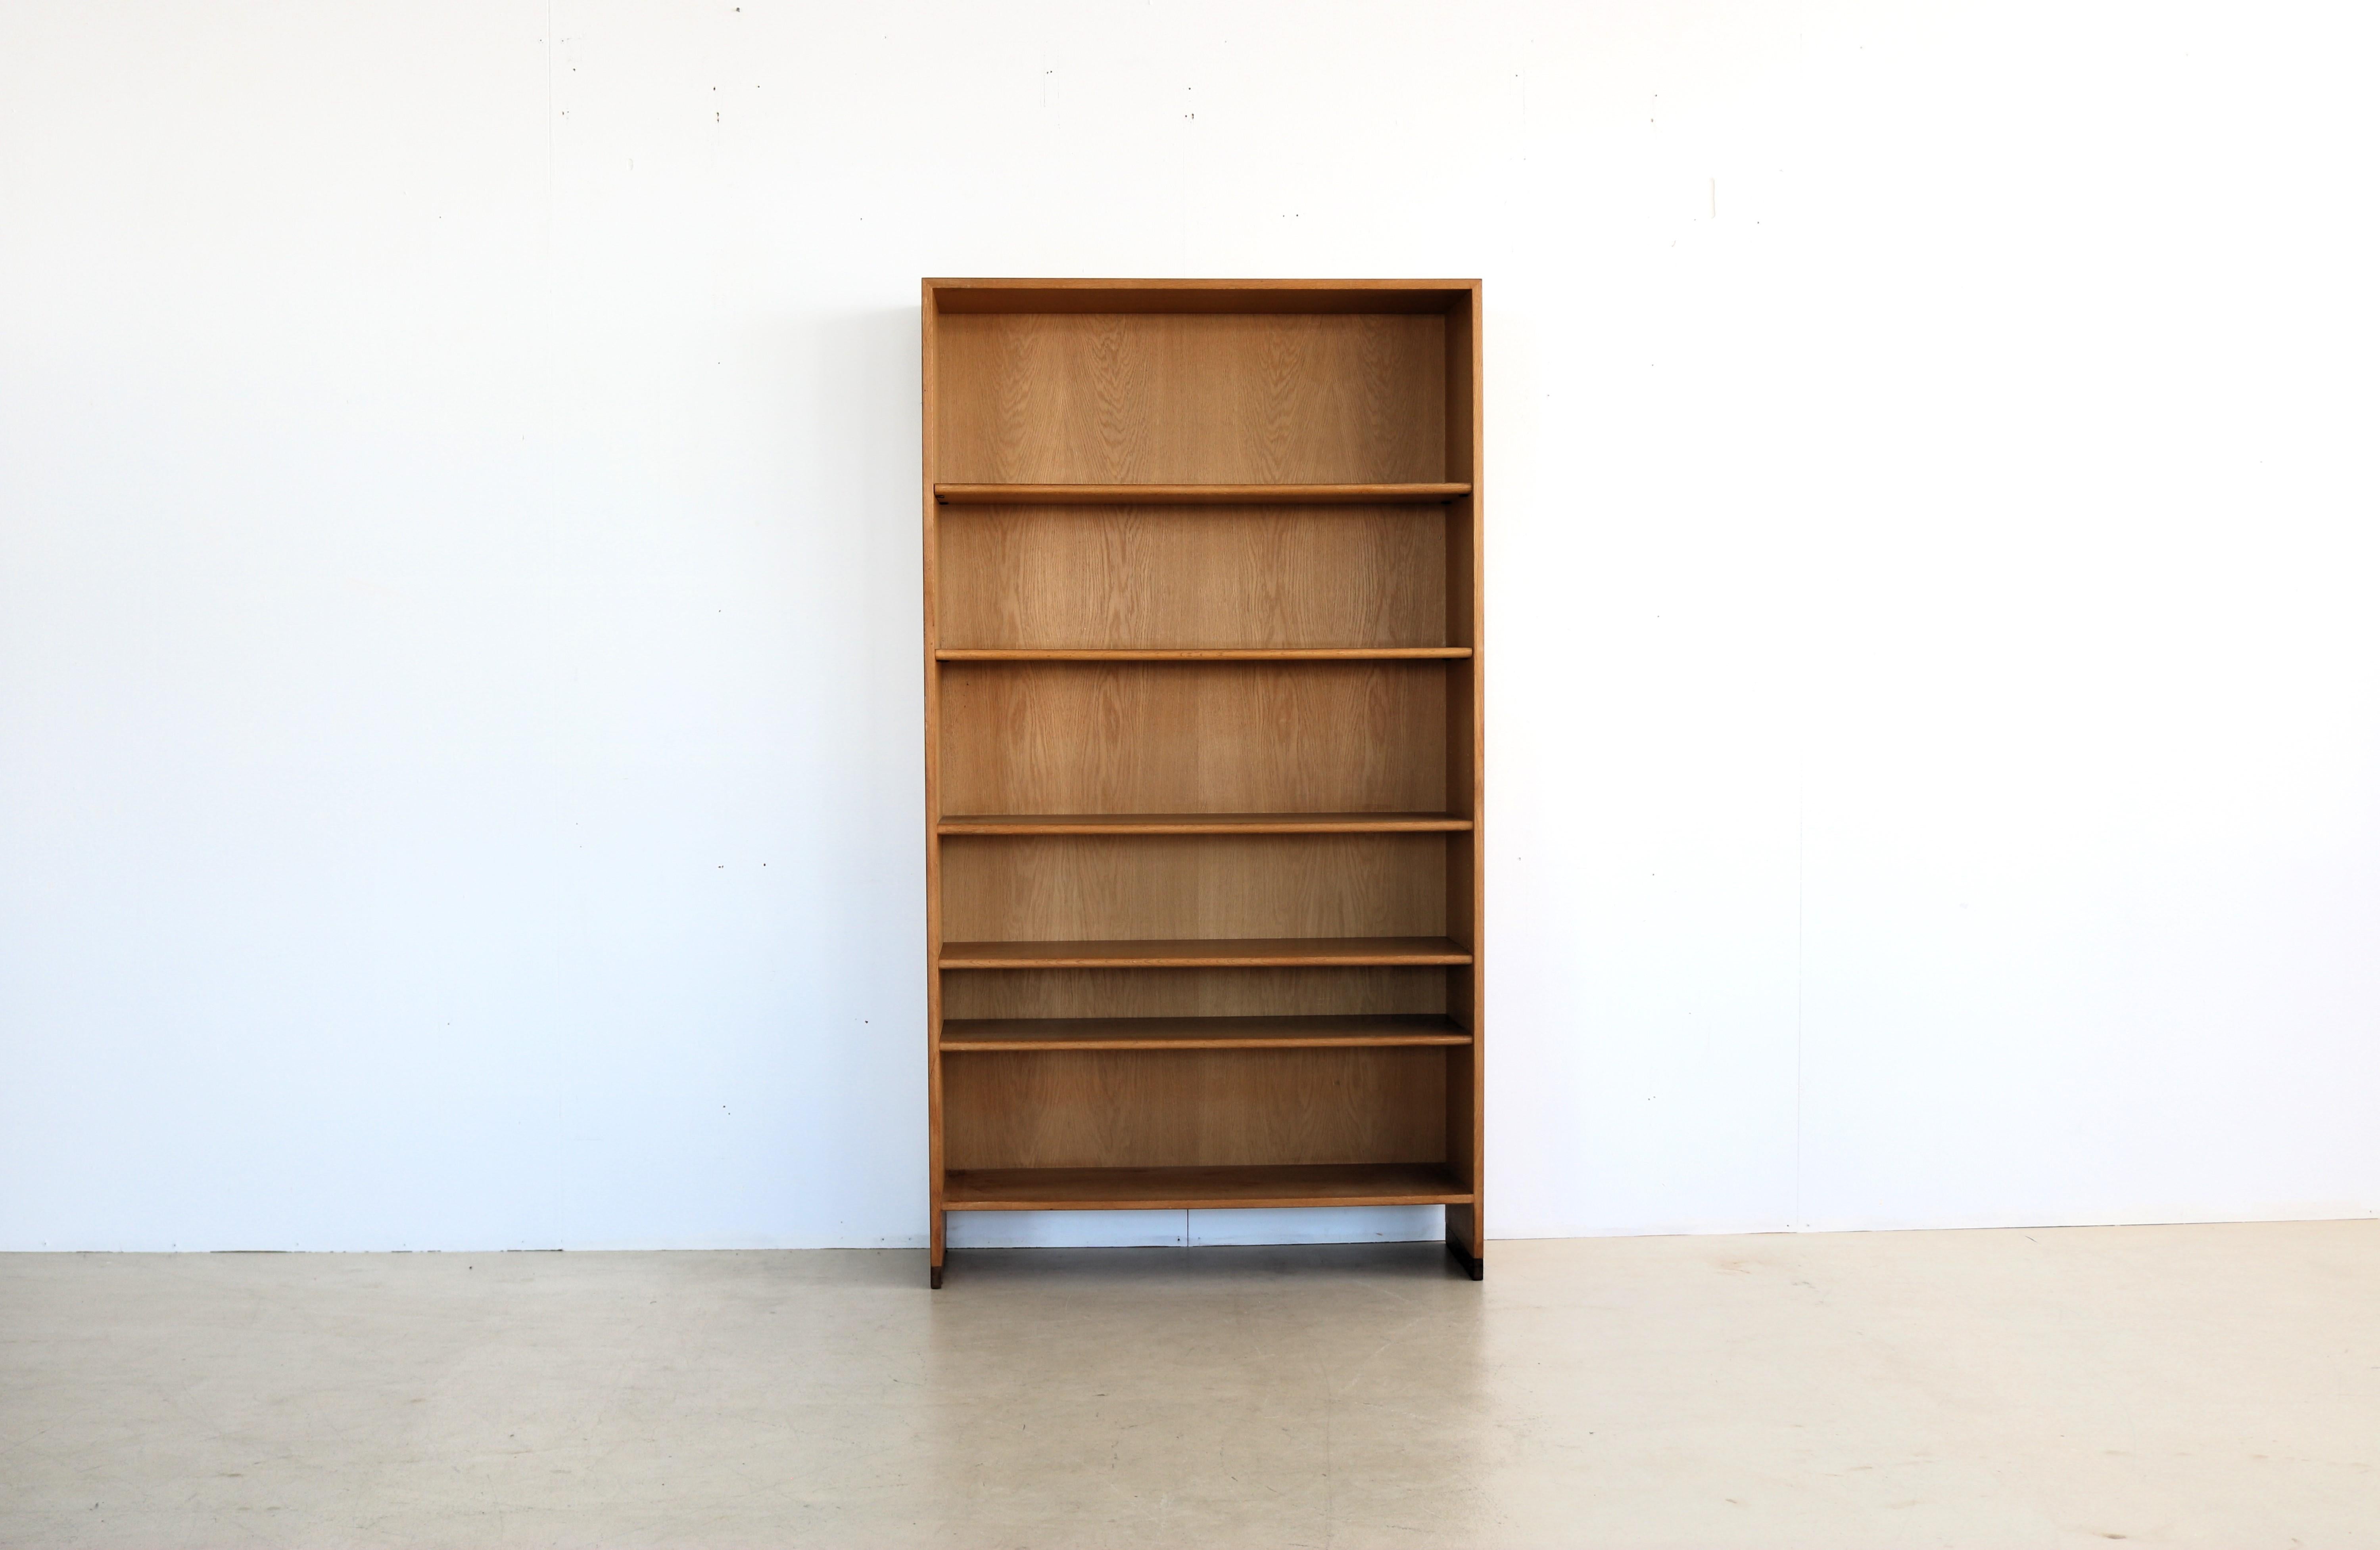 Vintage bookcases Hans Wegner RY8 R.Y. Mobler

Period 1950s
Designs Hans Wegner Ry Mobler model RY8 Denmark
Conditions good light signs of use
Size 180 x 100 x 33 (hxwxd)

details teak; oak; adjustable shelves; 2 pieces available; price is